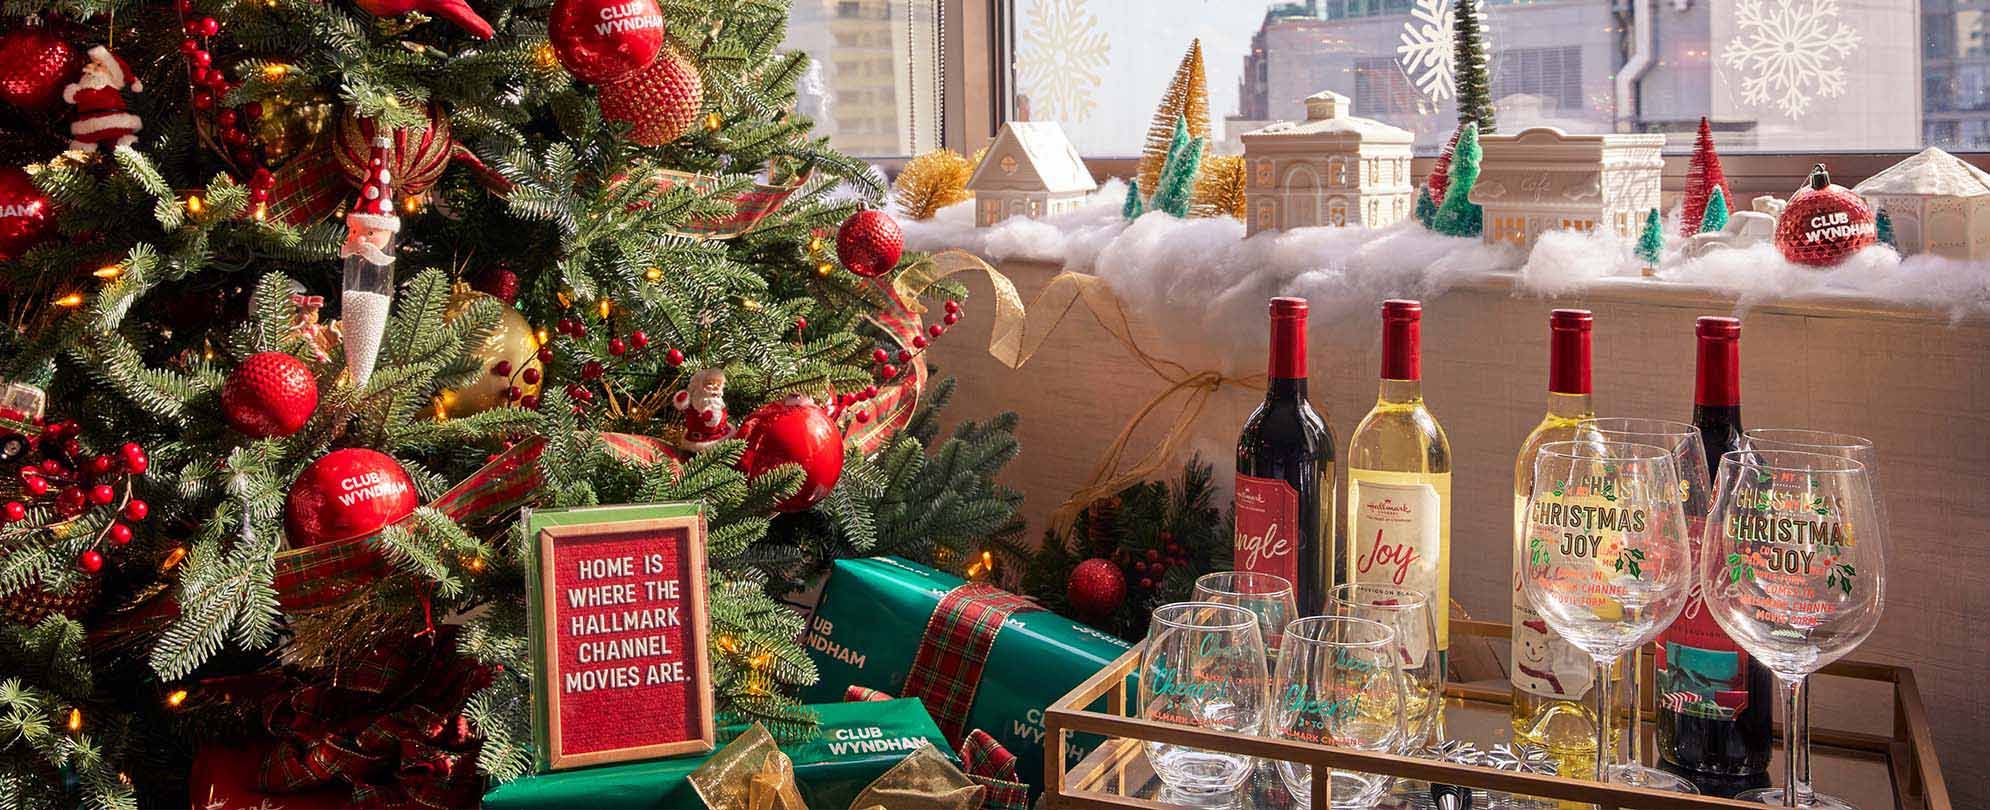 A bar cart with four holiday wines and Christmas decorated wine glasses next to the Christmas tree and a sign that says, "Home is where the Hallmark Channel movies are."